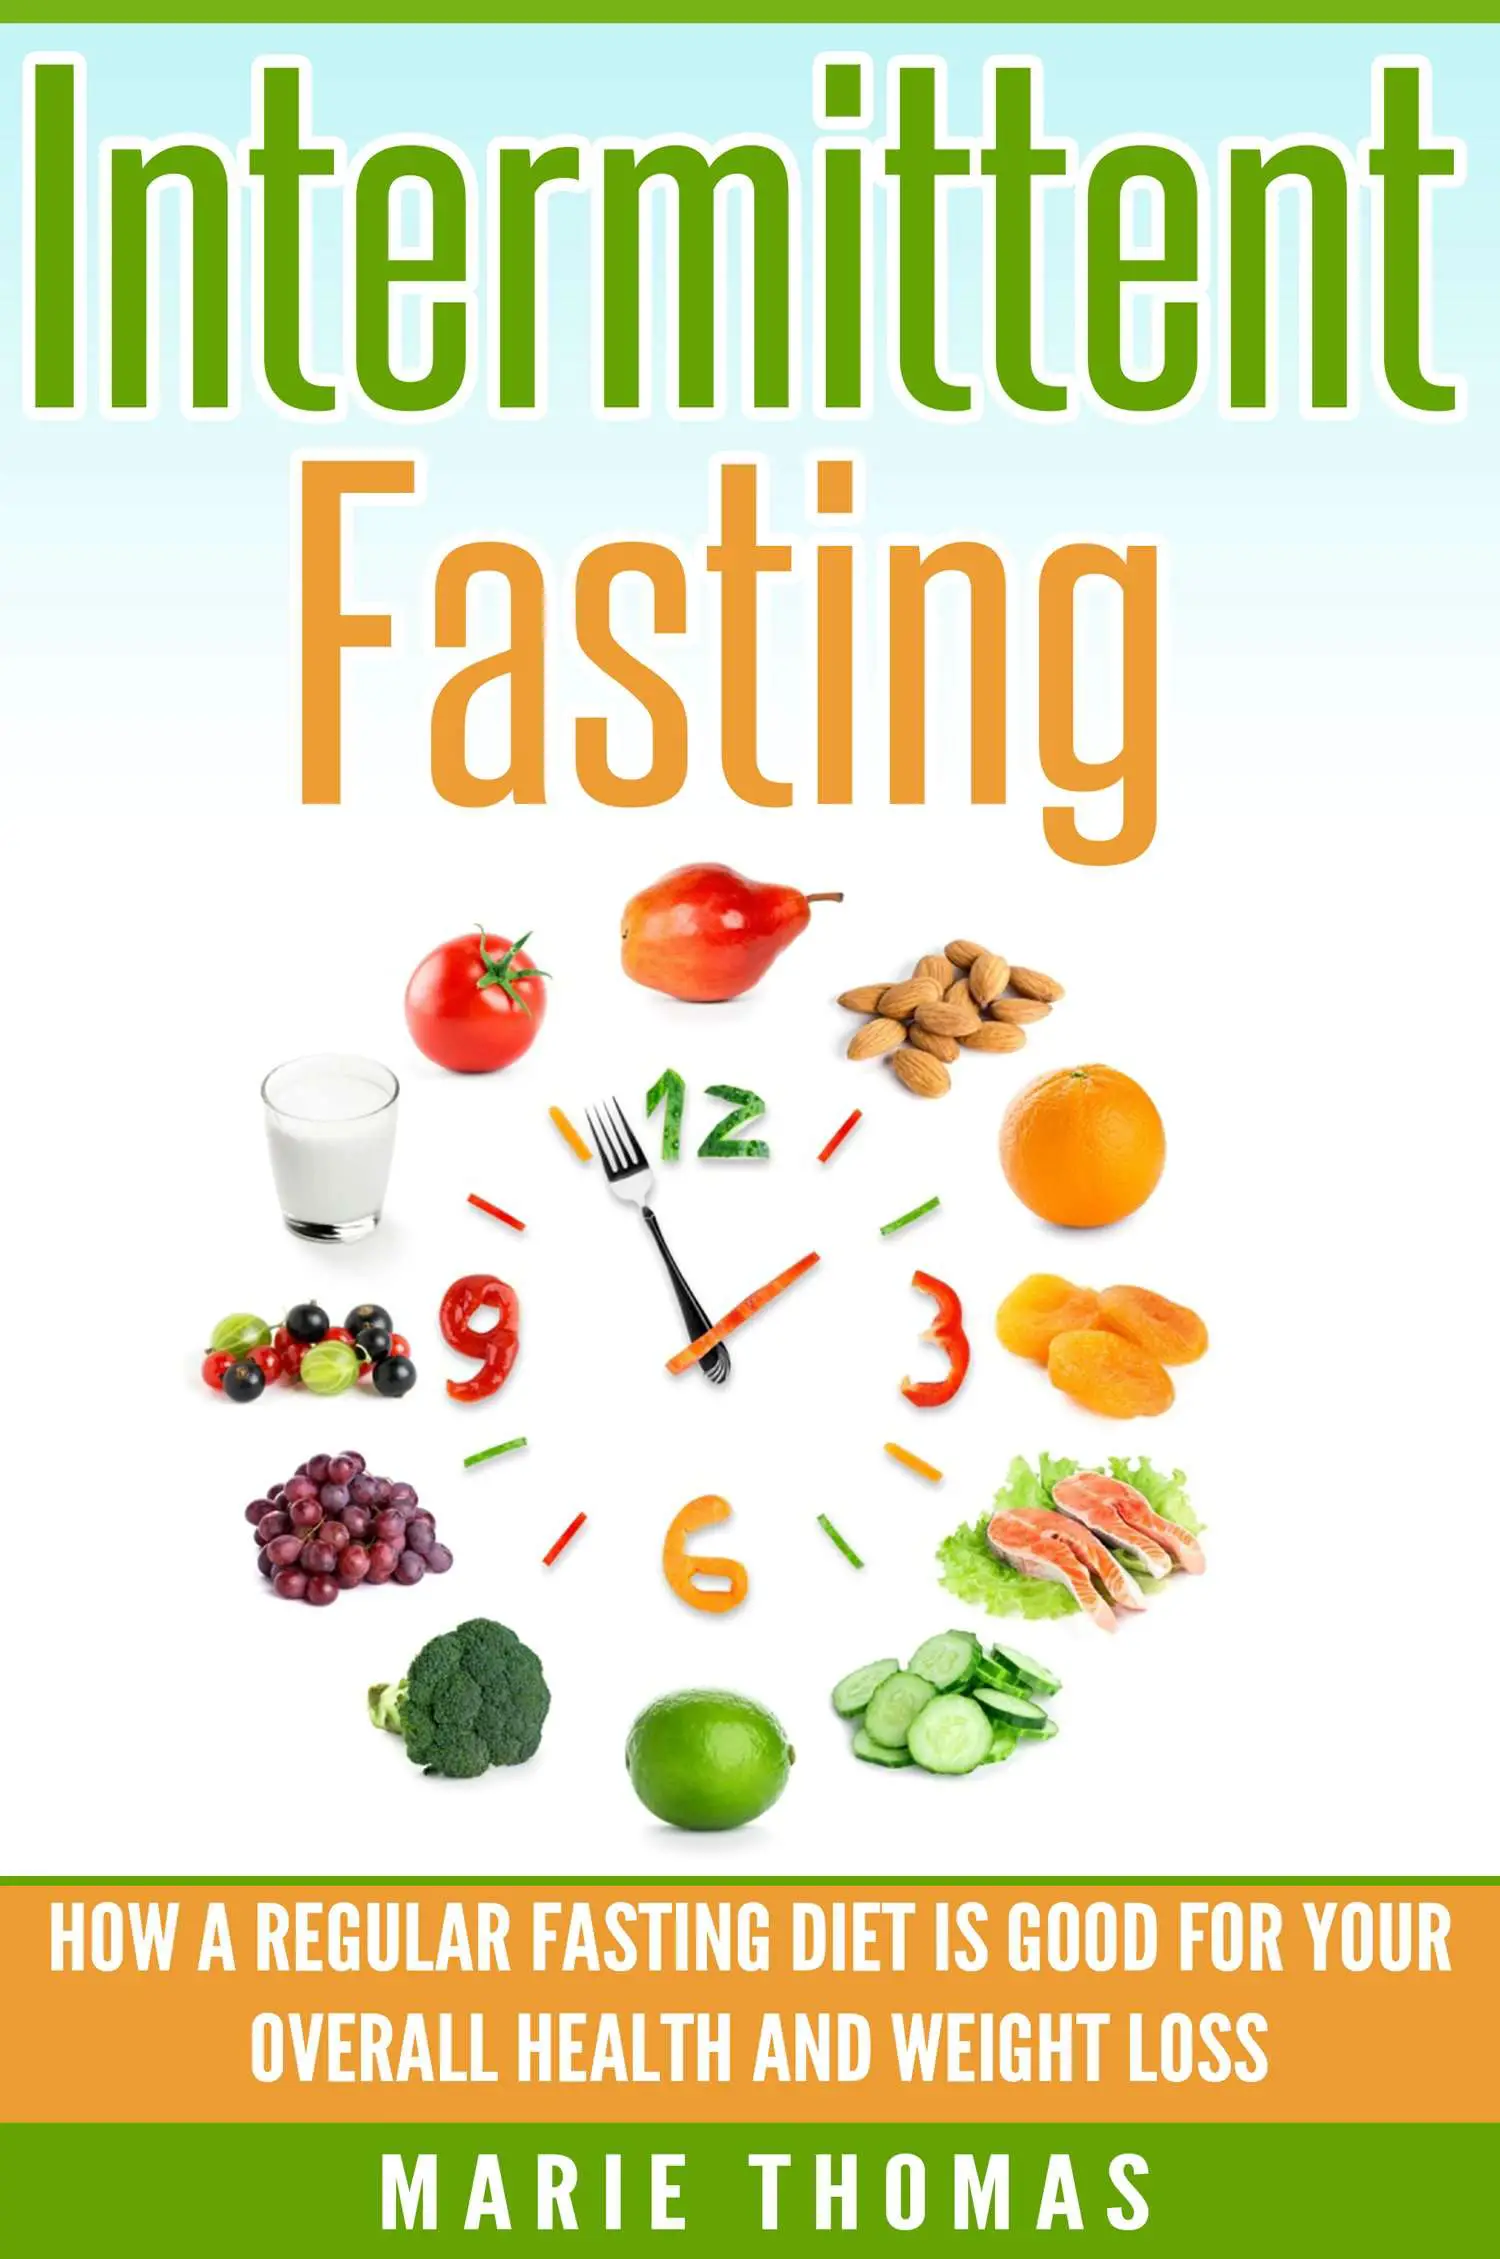 Intermittent Fasting: How a Regular Fasting Diet is Good ...